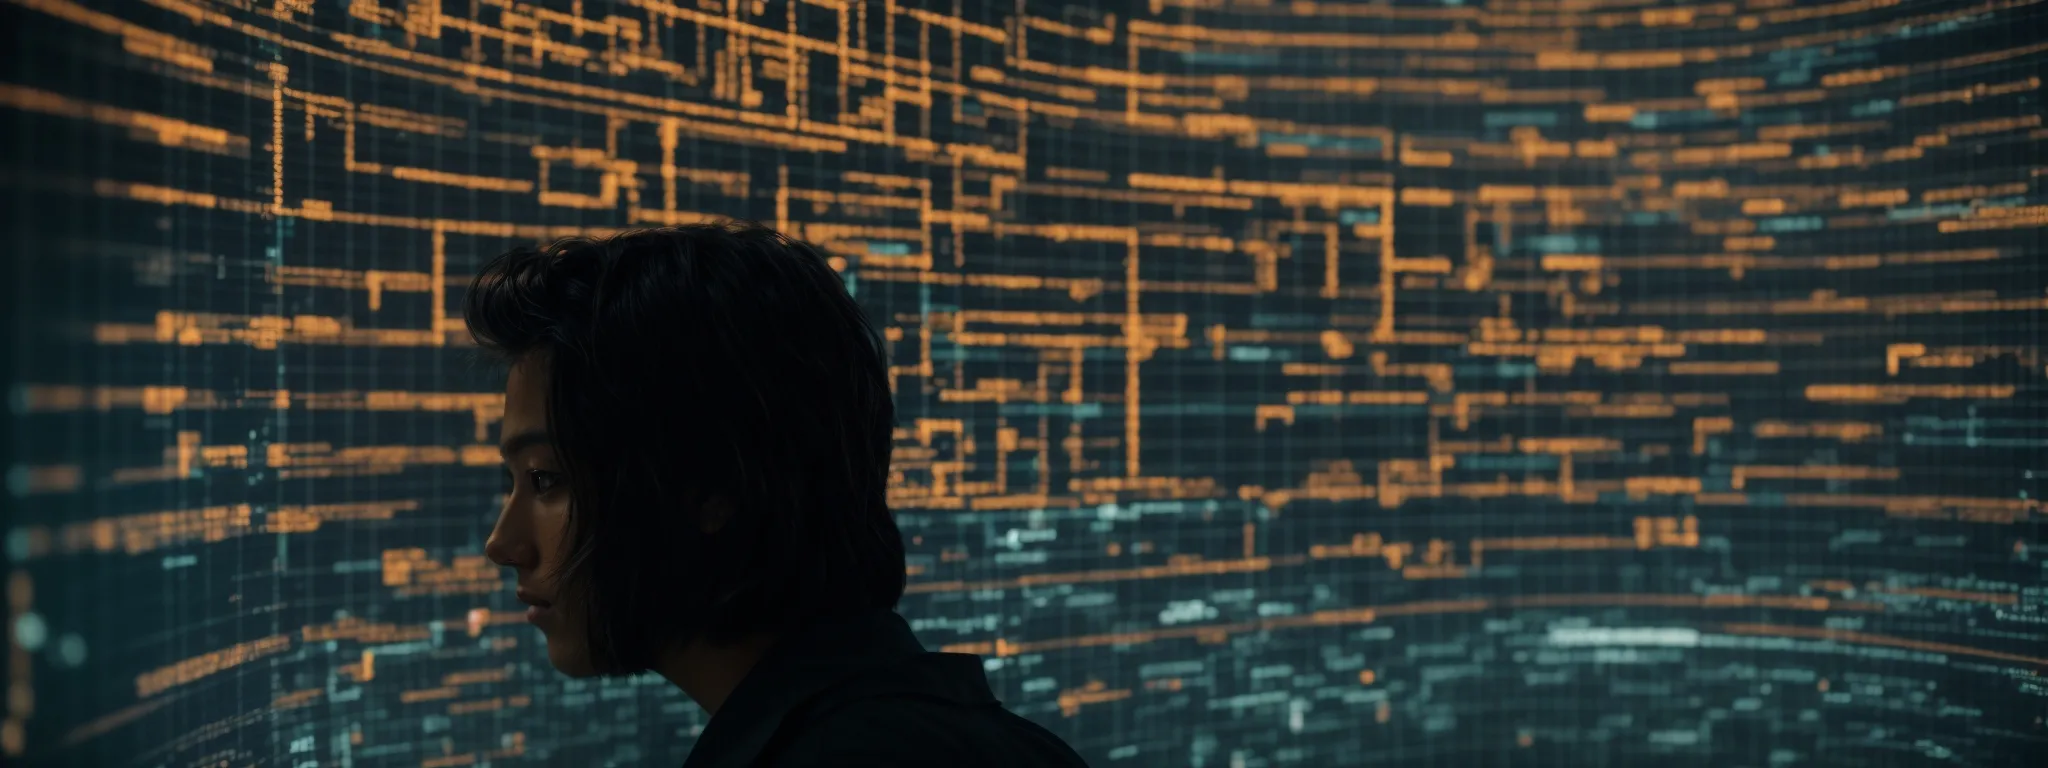 a person illuminated by the glow of a computer screen sifts through a labyrinthine data chart, representing the search for valuable keywords.